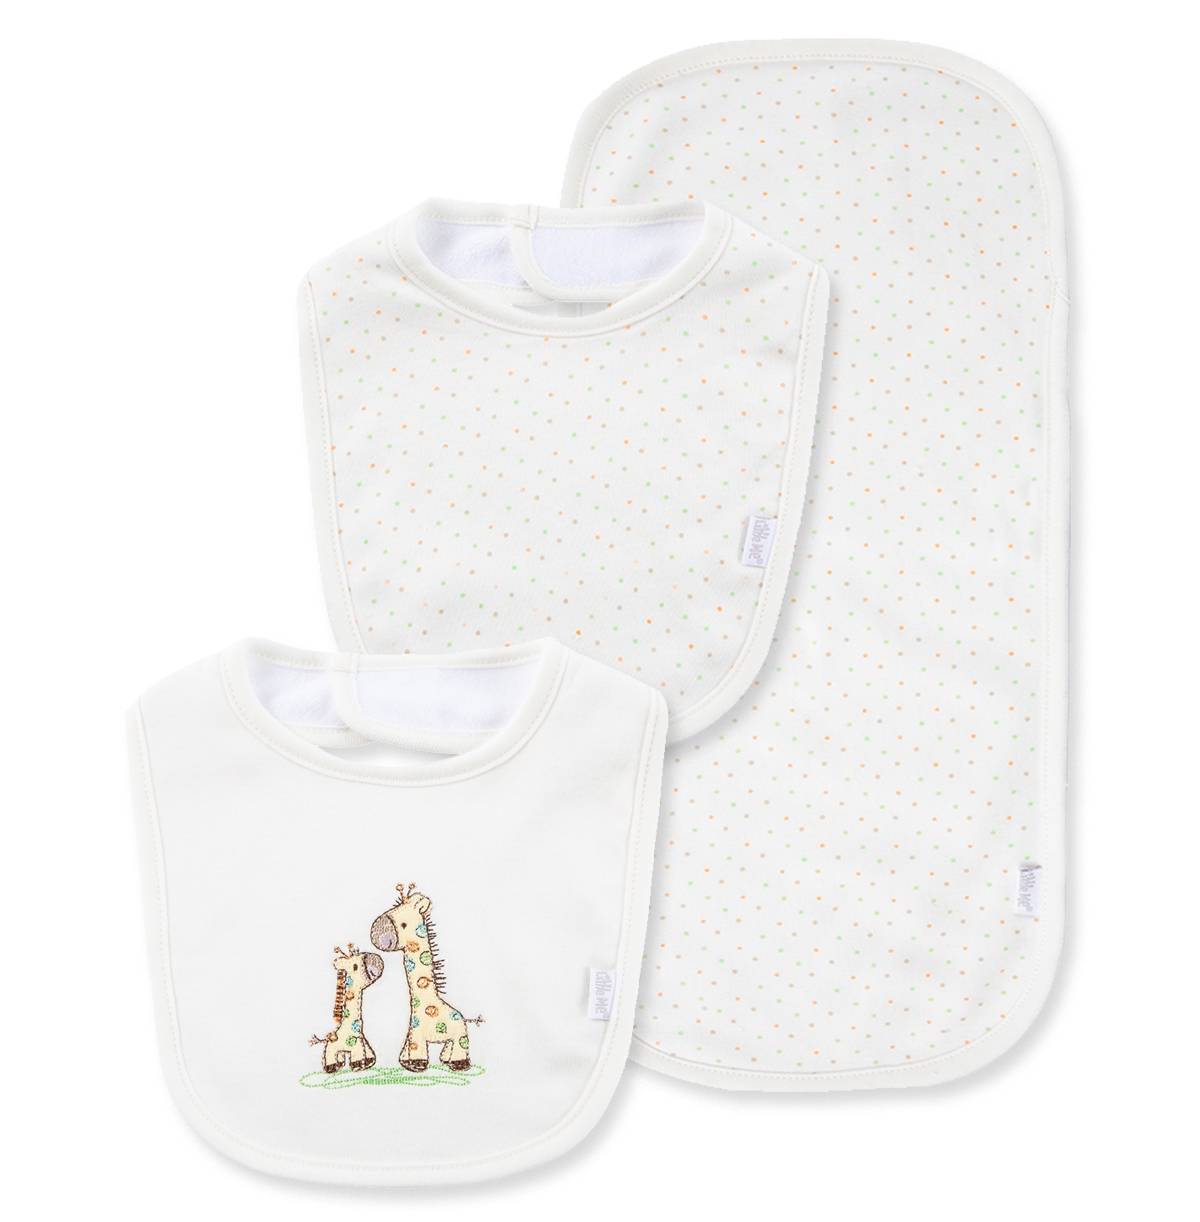 Little Me Baby Boys And Baby Girls Giraffe Bibs And Burp Cloth In White